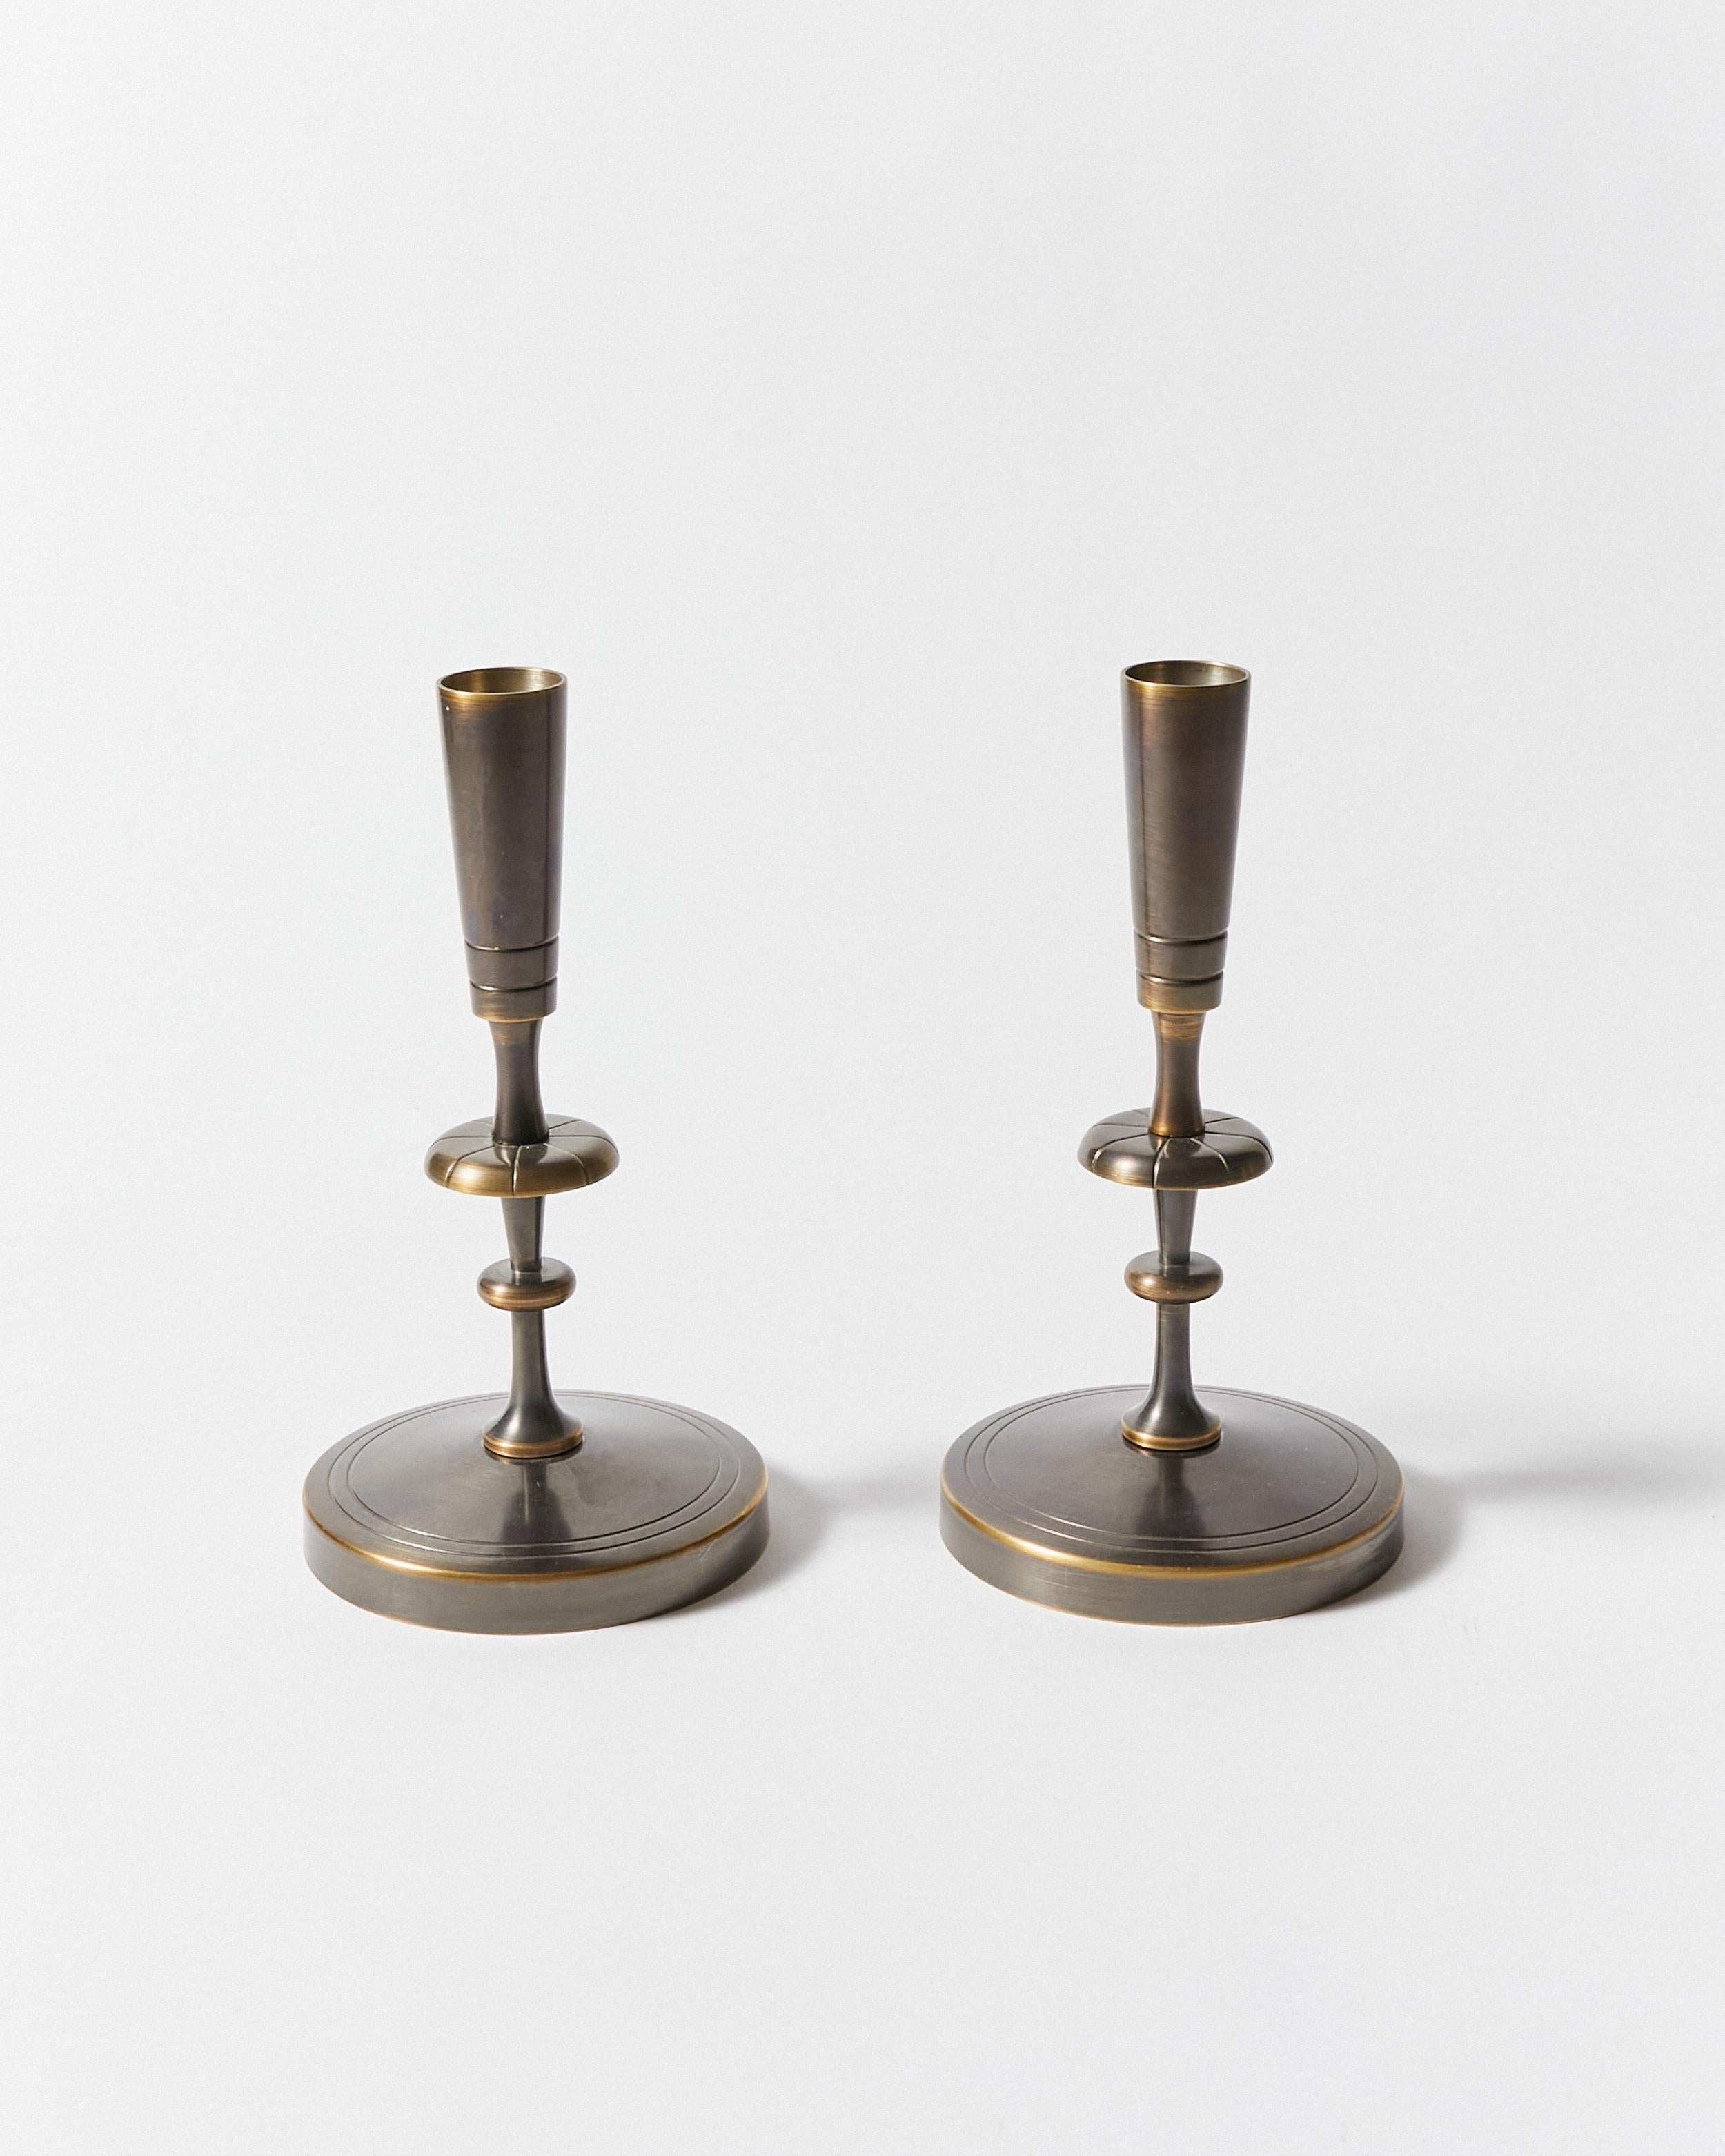 Set of four candlesticks re-finished in antique bronze. Designed by Tommi Parzinger for Dorlyn-Silversmiths.